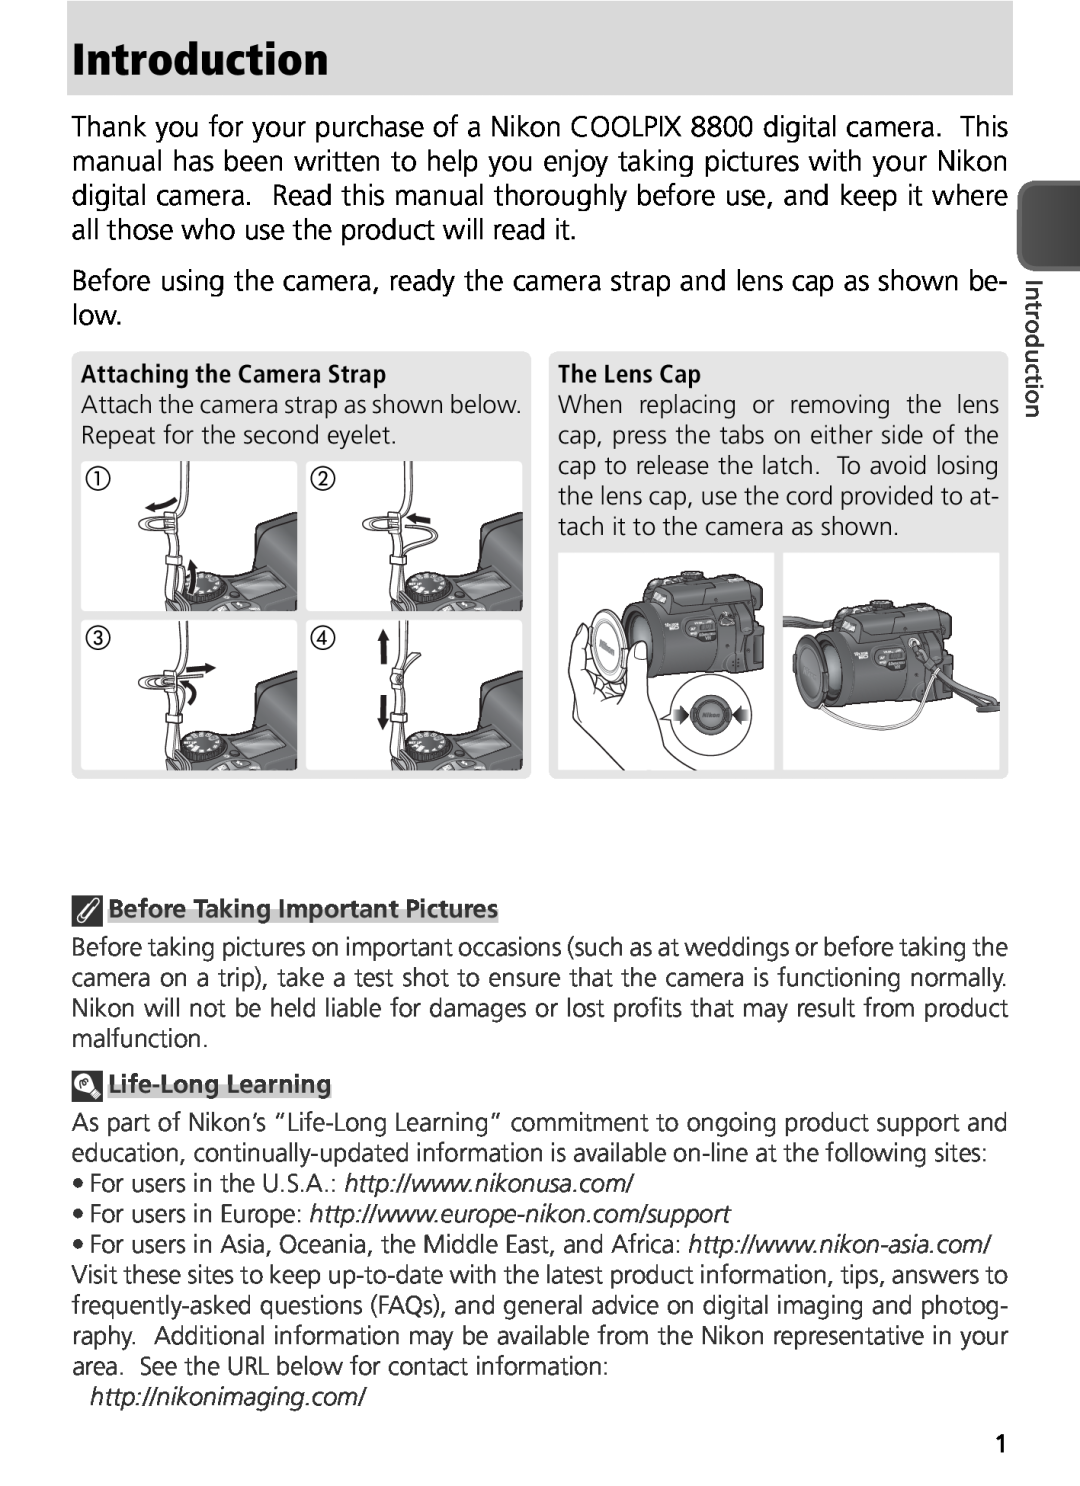 Nikon COOLPIX8800 manual Introduction, Attaching the Camera Strap, The Lens Cap 